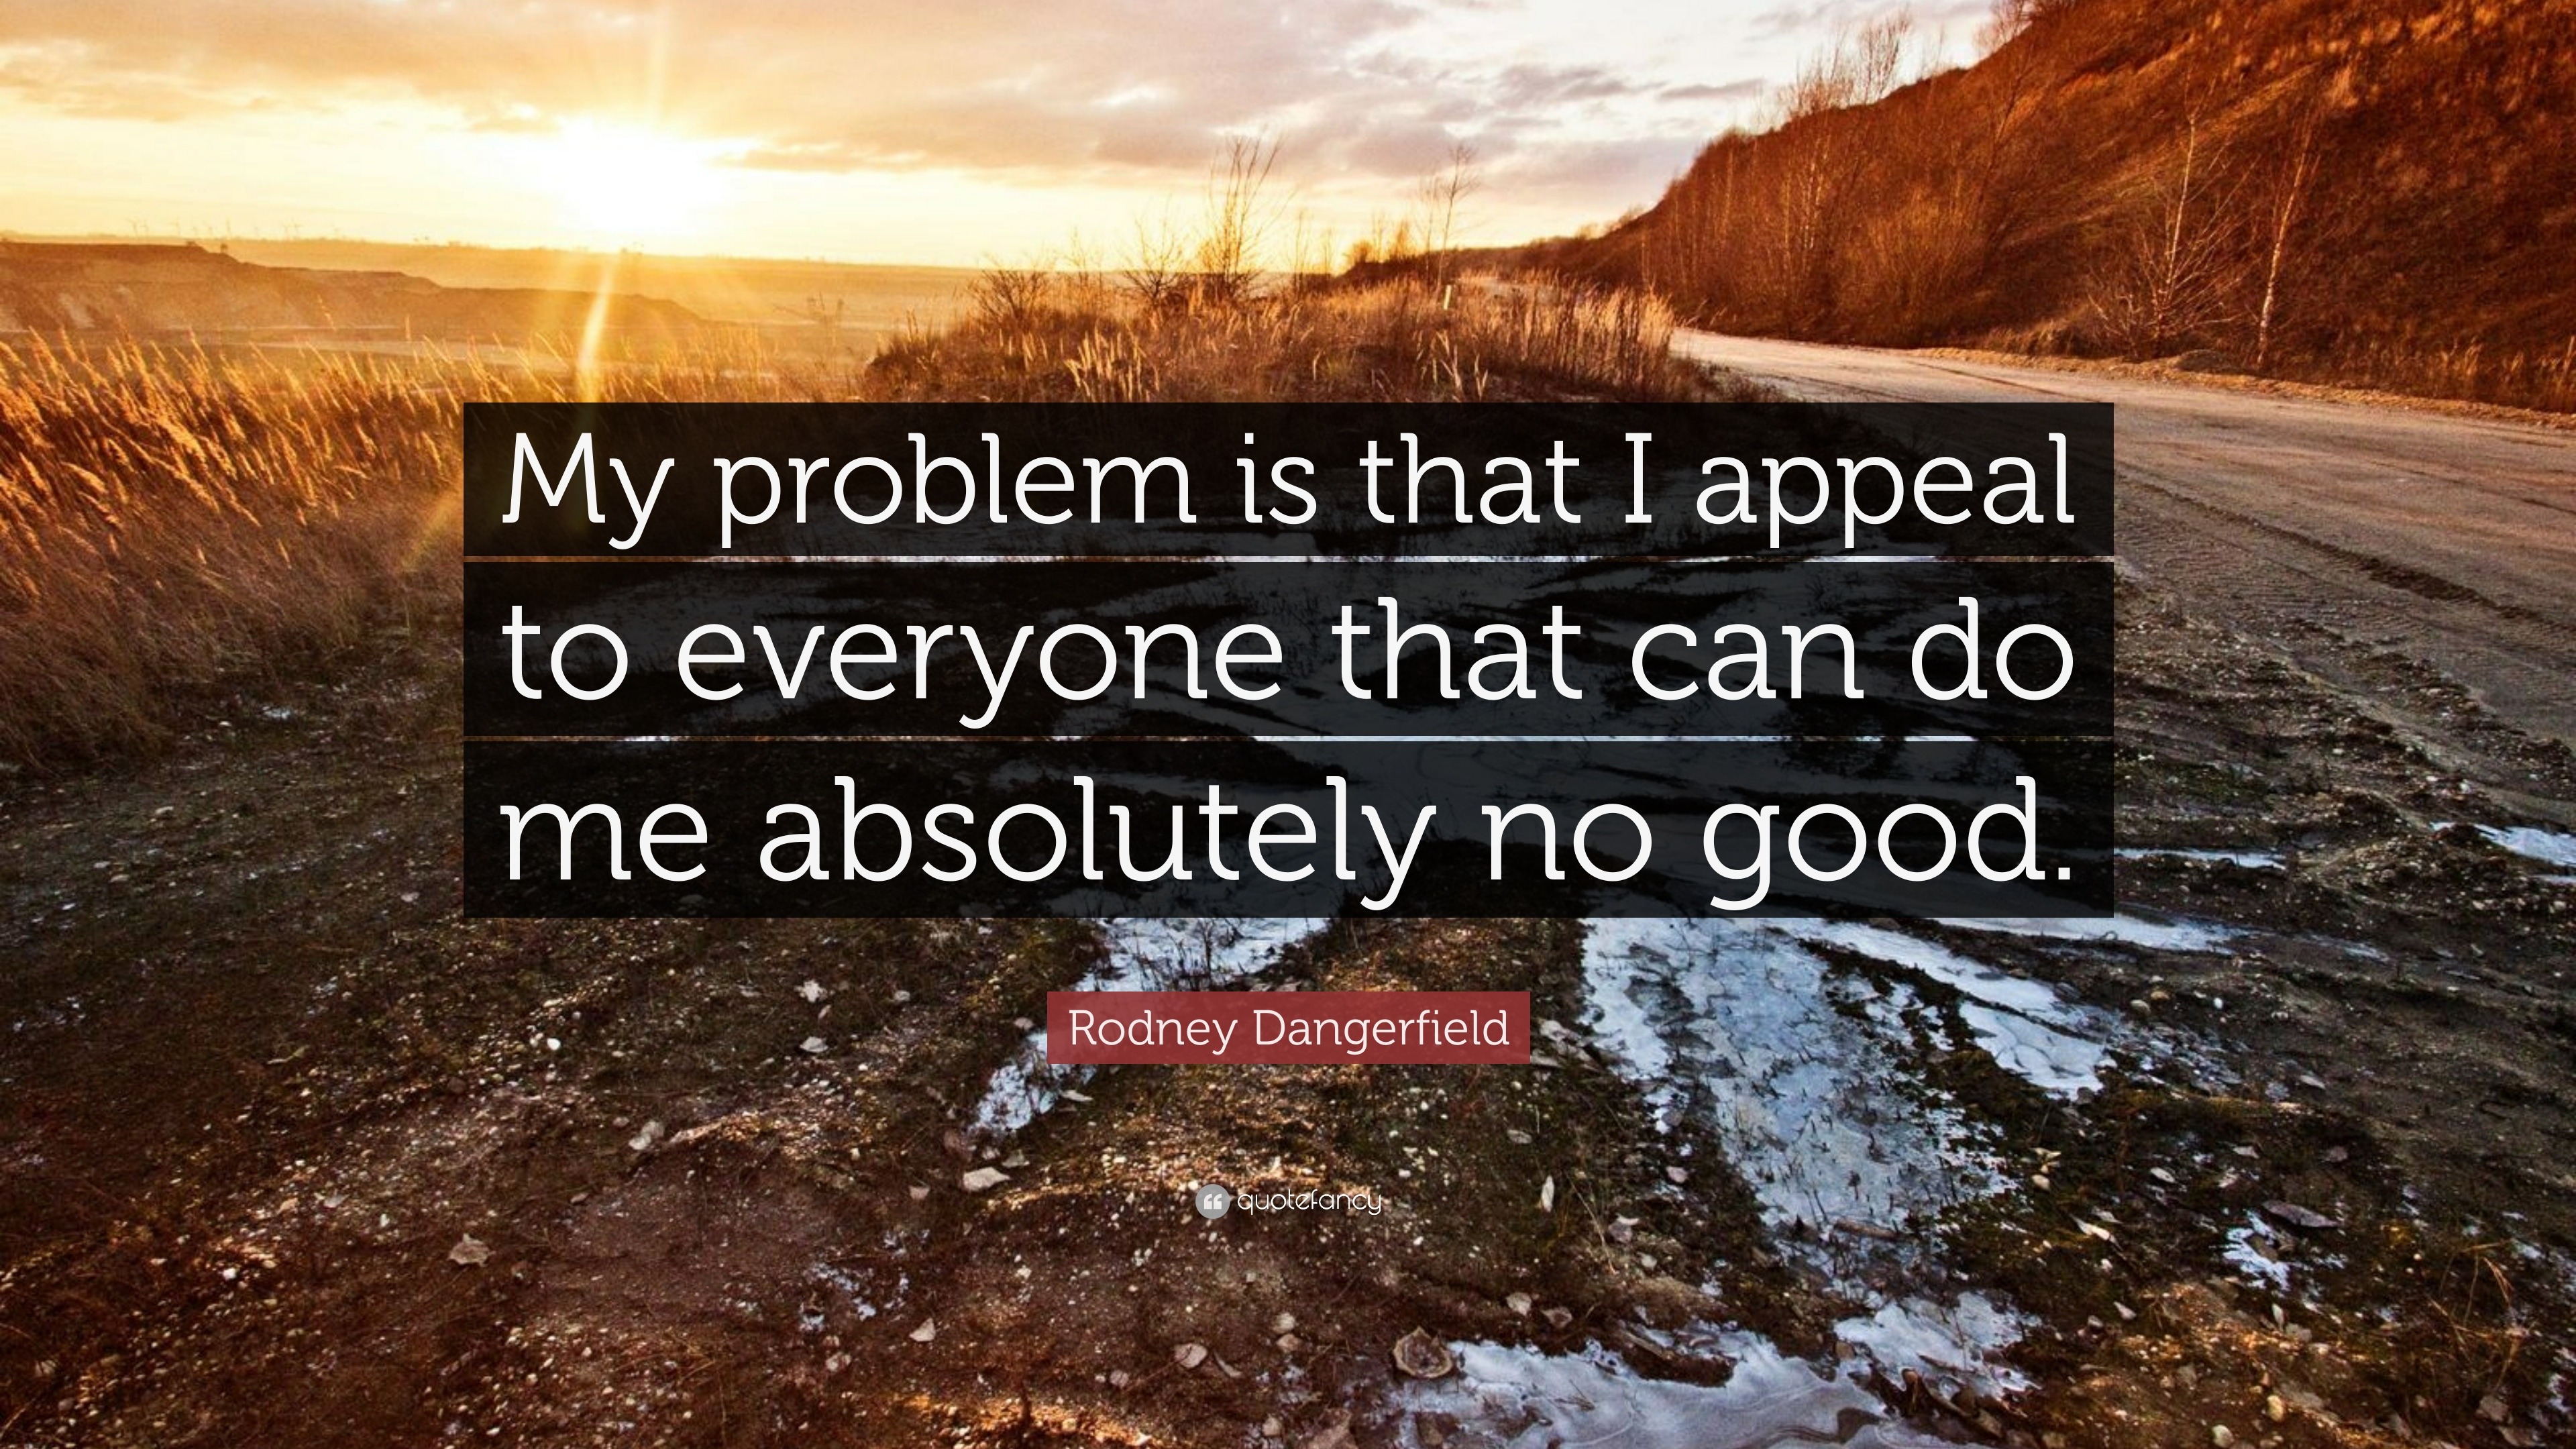 Rodney Dangerfield Quote: “My problem is that I appeal to everyone that ...